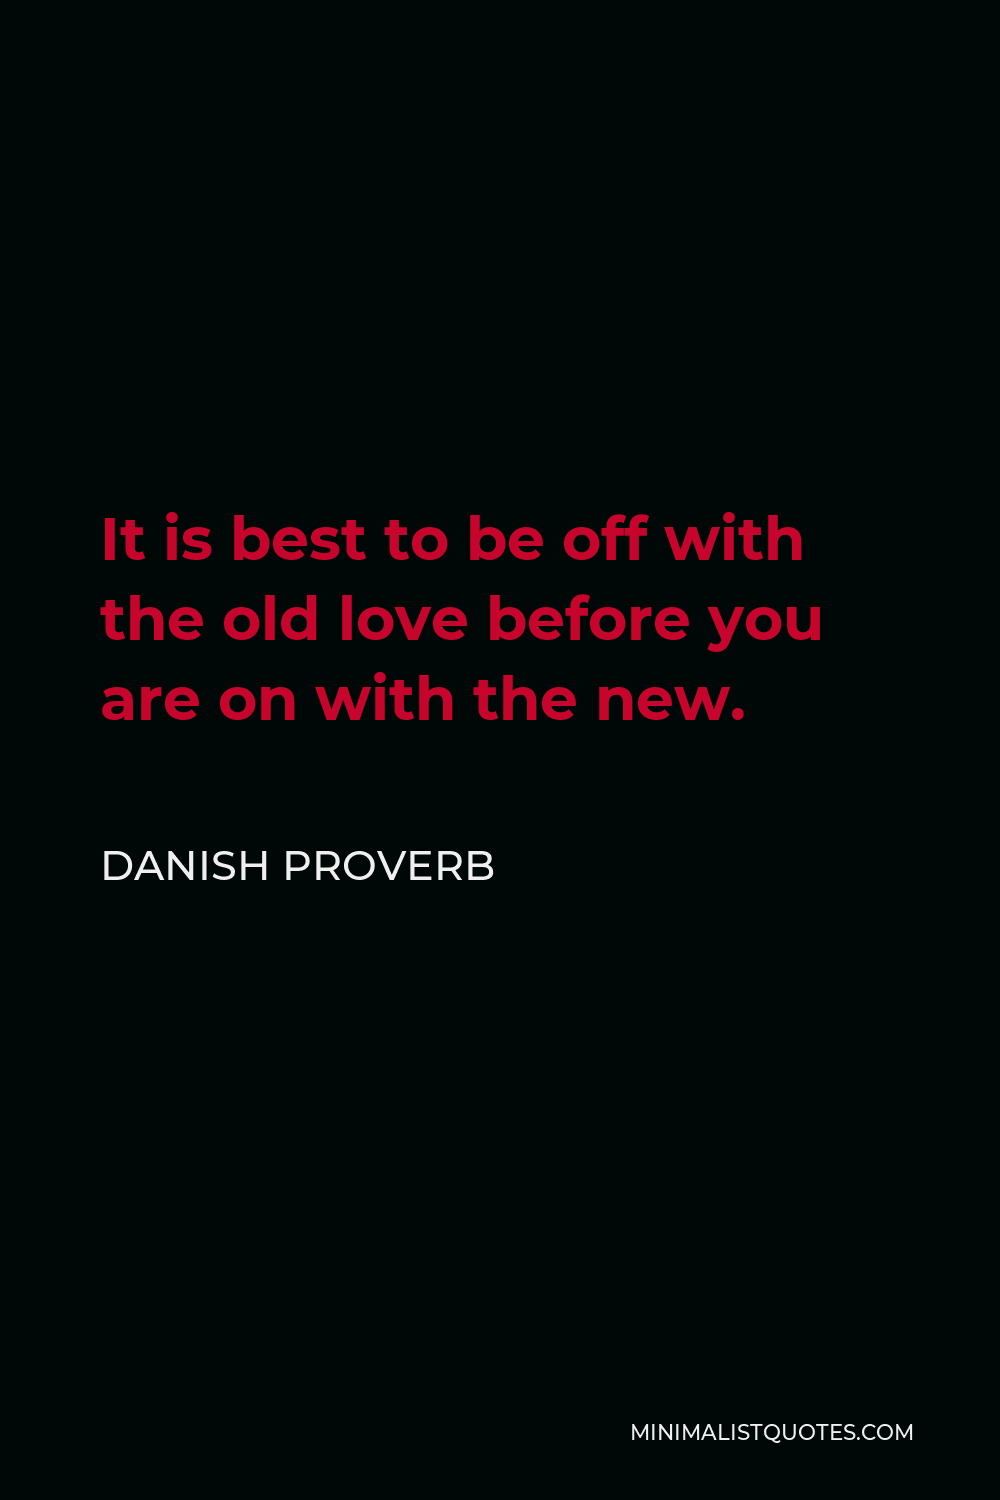 Danish Proverb Quote - It is best to be off with the old love before you are on with the new.